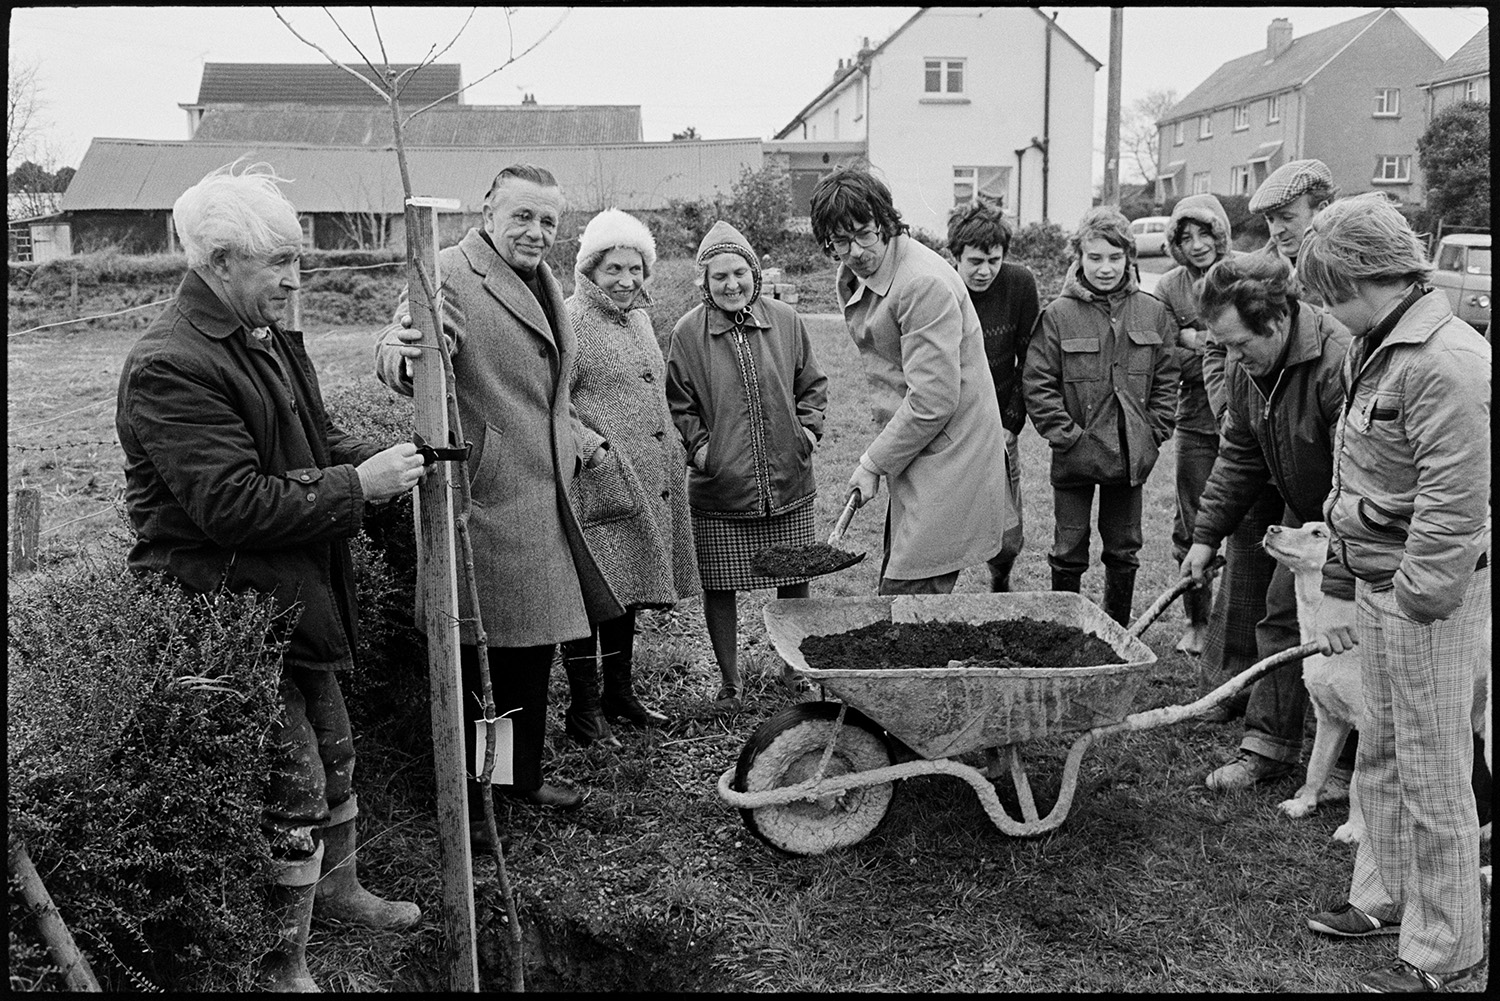 People planting tree to mark the Jubilee. 
[A group of men and women planting a tree in Atherington to celebrate the Silver Jubilee of Queen Elizabeth II. A man is shovelling earth from a wheelbarrow to fill the hole the tree is being planted in. Another man is holding the tree. A group of men, women and teenagers are watching.]